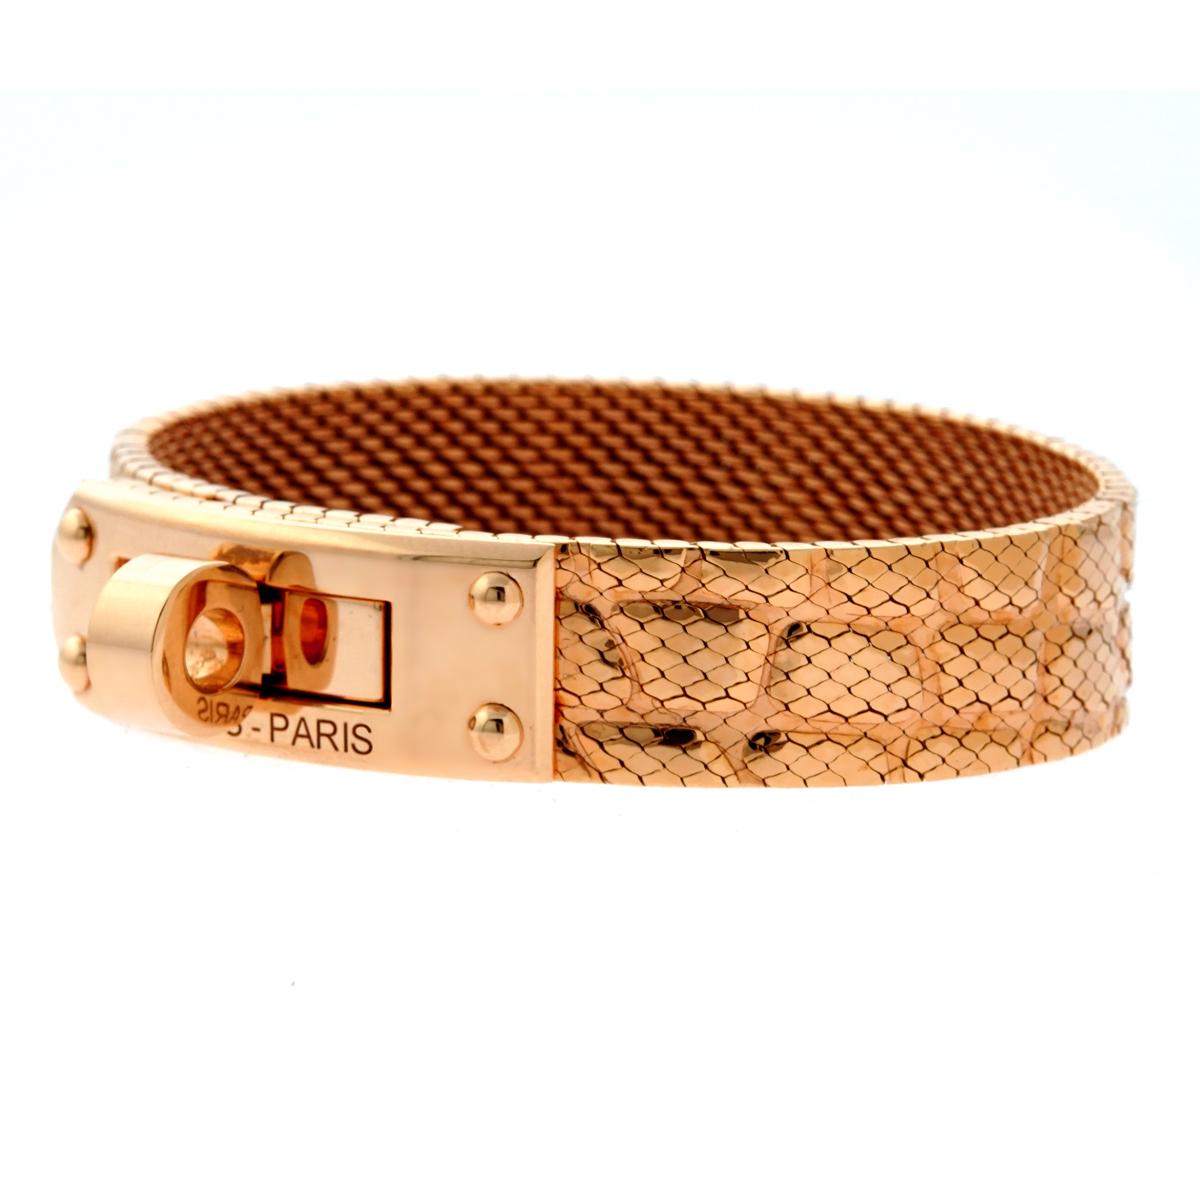 A stunning 18kt rose gold bracelet by Hermes from the Kelly collection, this chic flexible bracelet measures .51